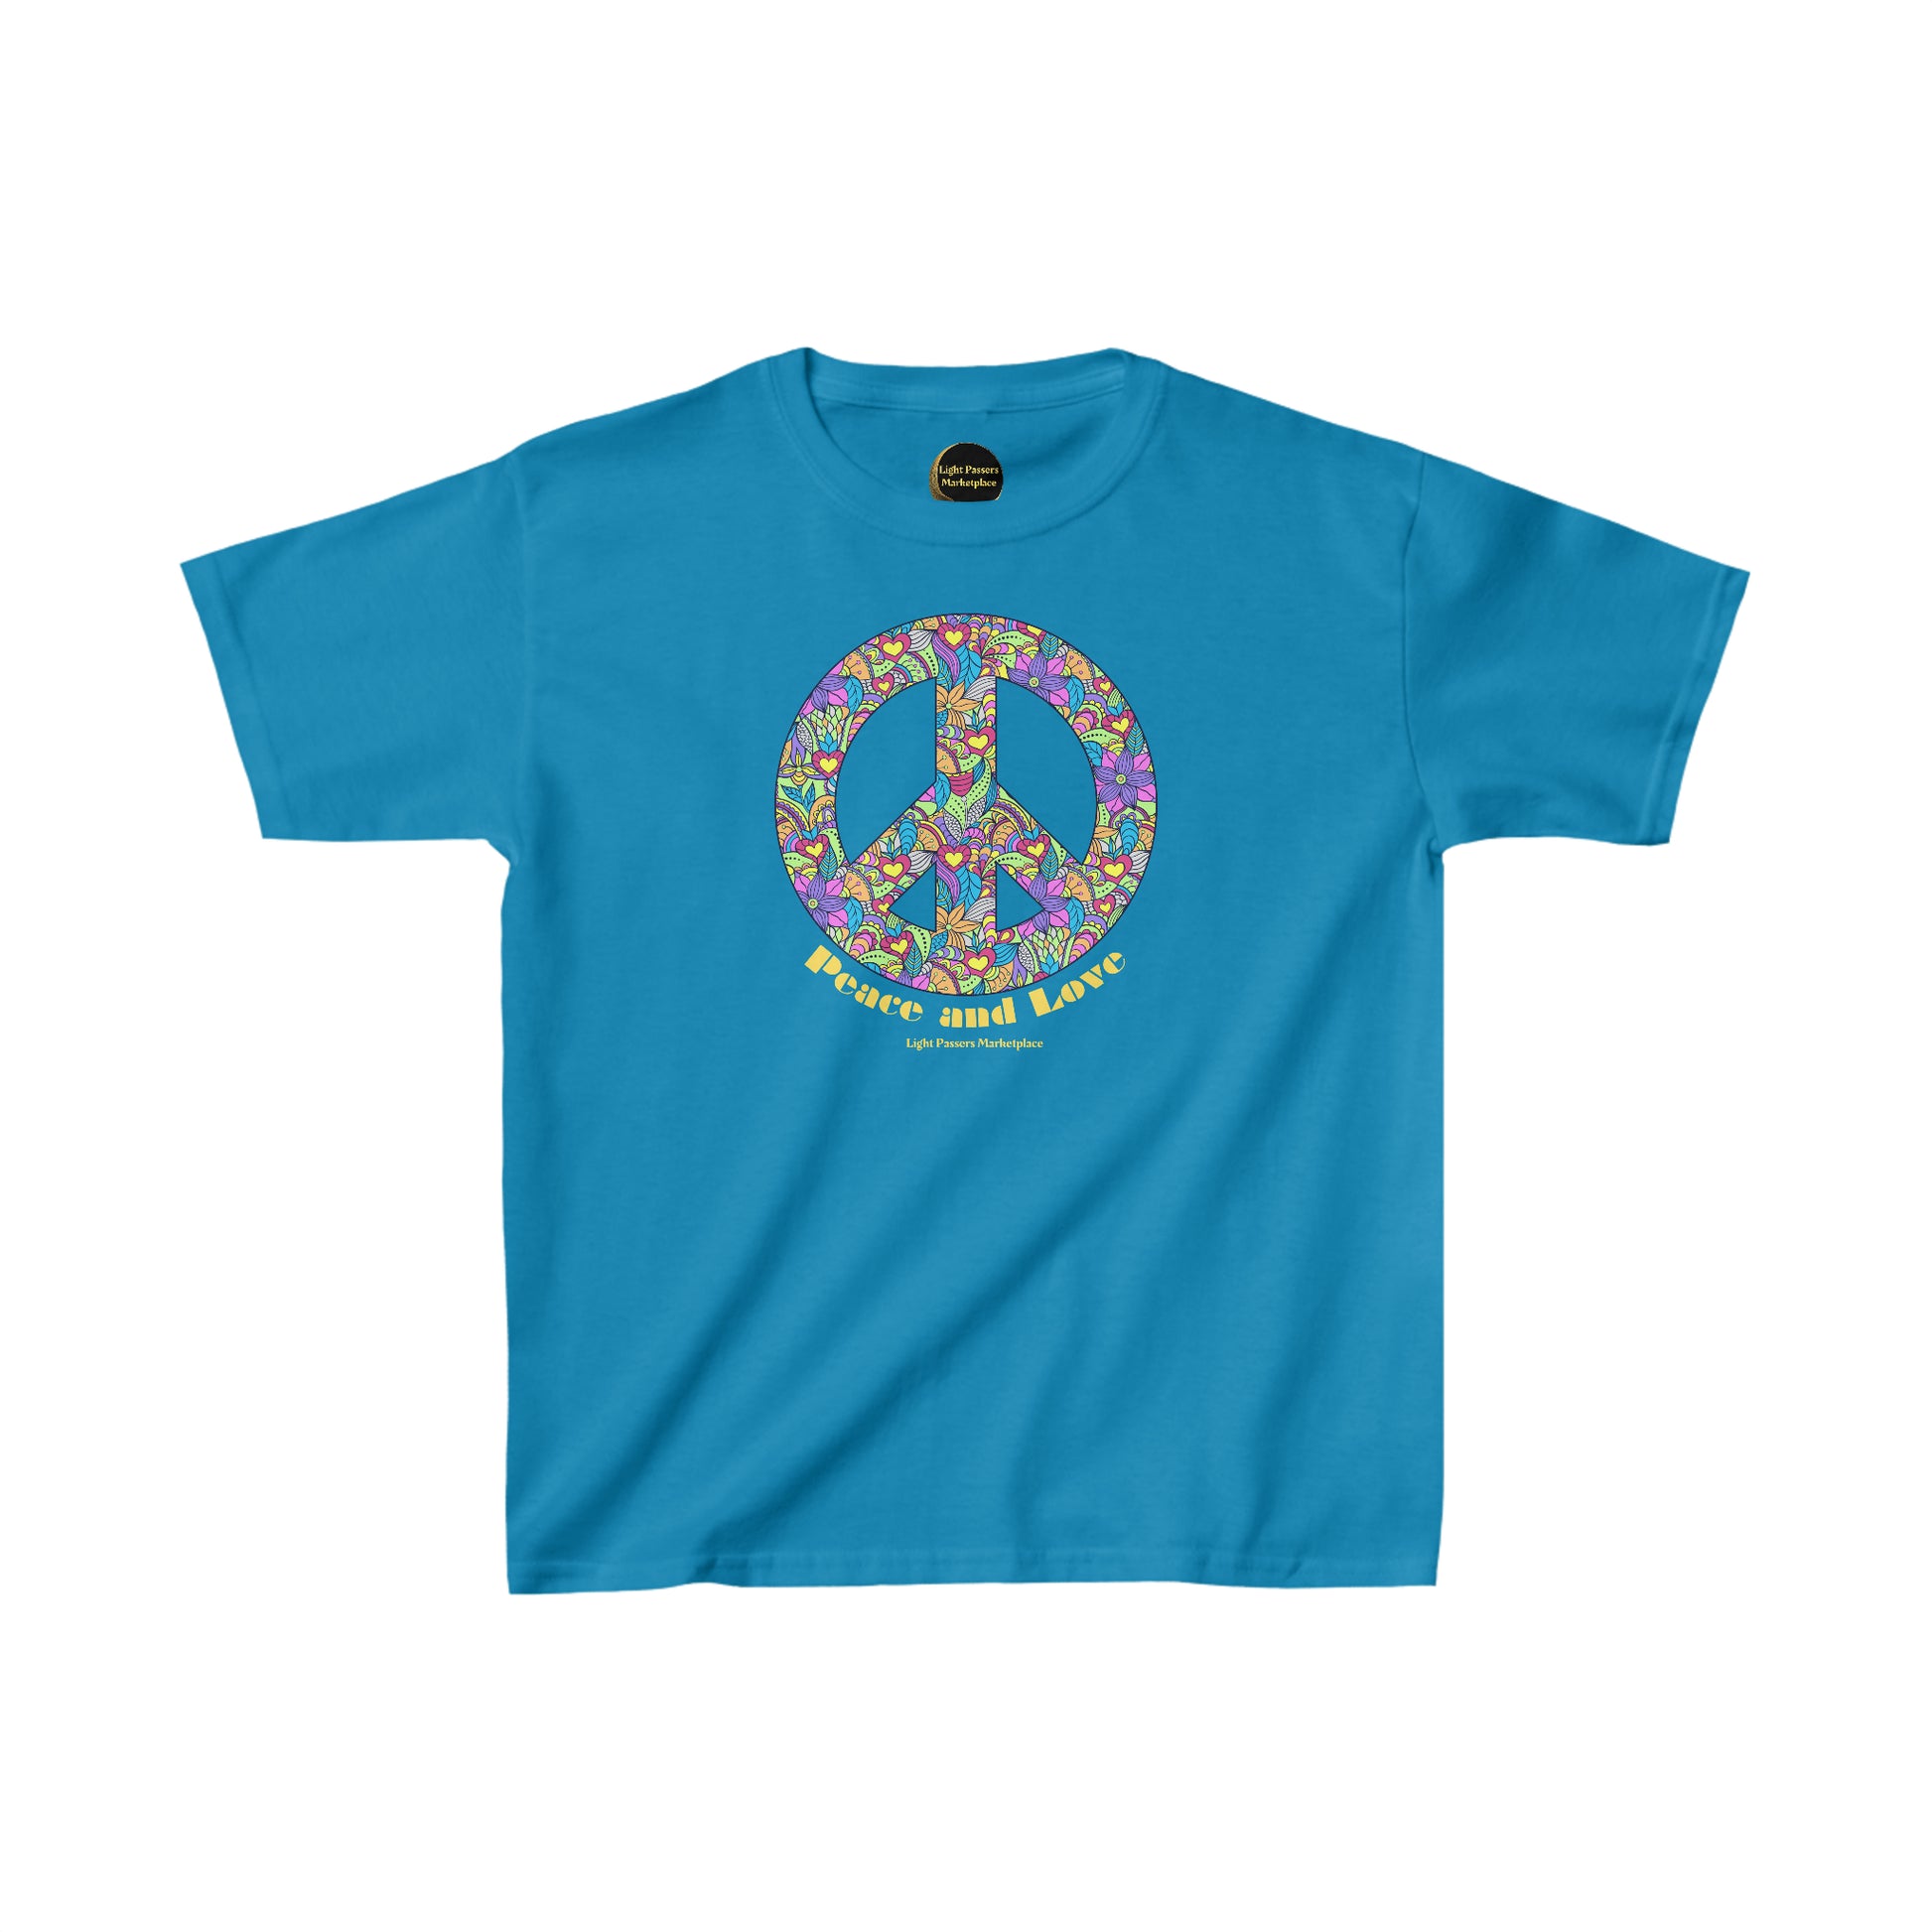 Youth blue t-shirt featuring a peace sign adorned with flowers and hearts. Made of 100% cotton for comfort, with twill tape shoulders for durability and ribbed collar for curl resistance.